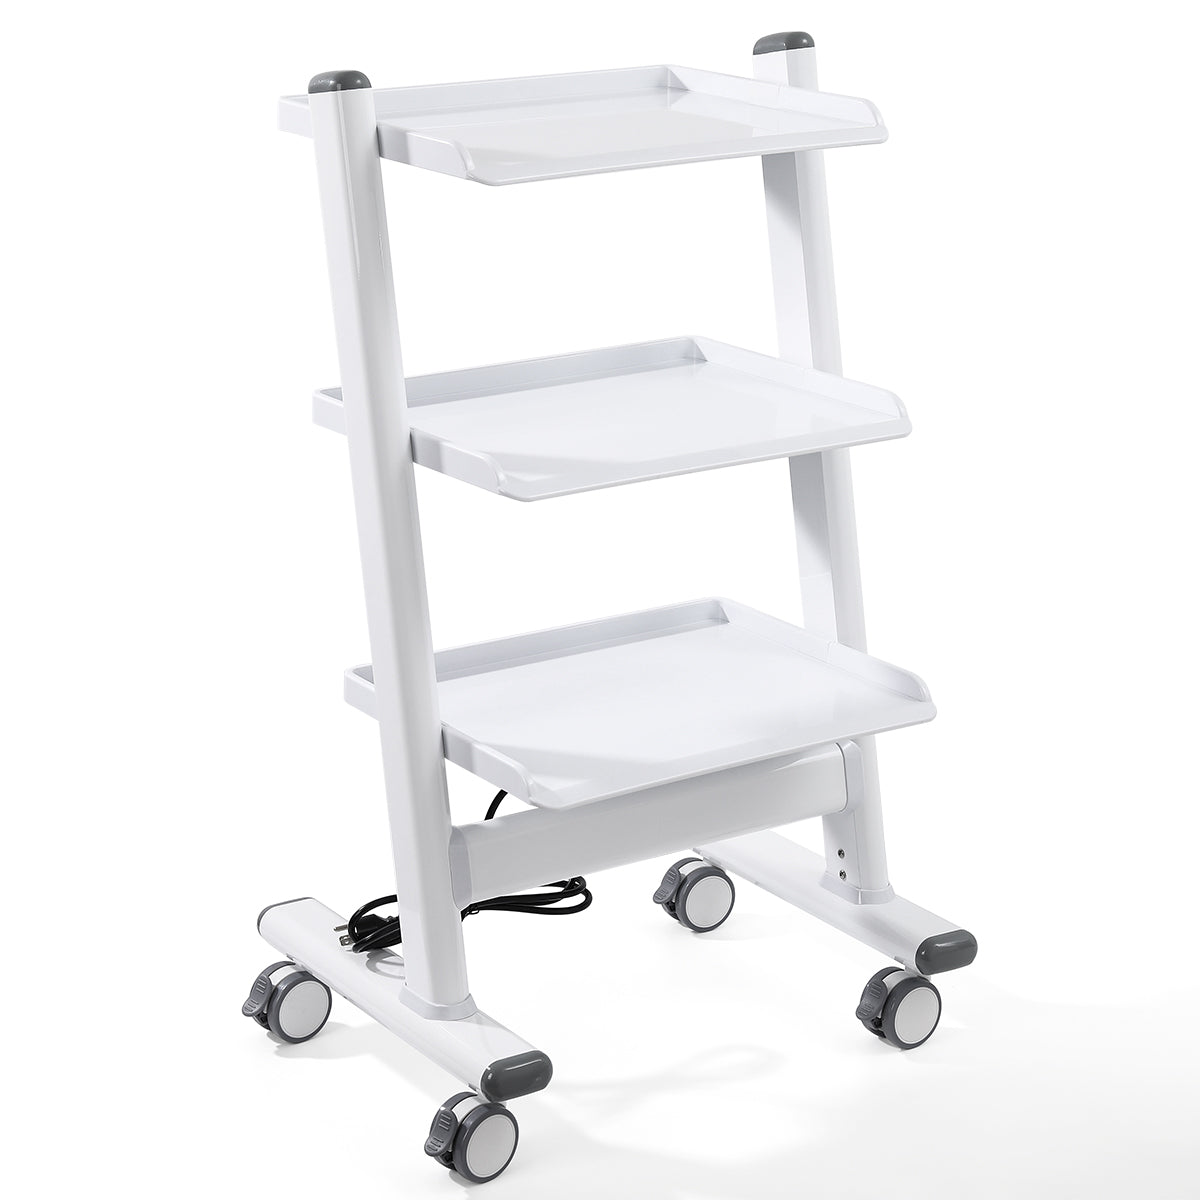 Dental Trolley Mobile Instrument Cart 3 Layers with Socket - pairaydental.com